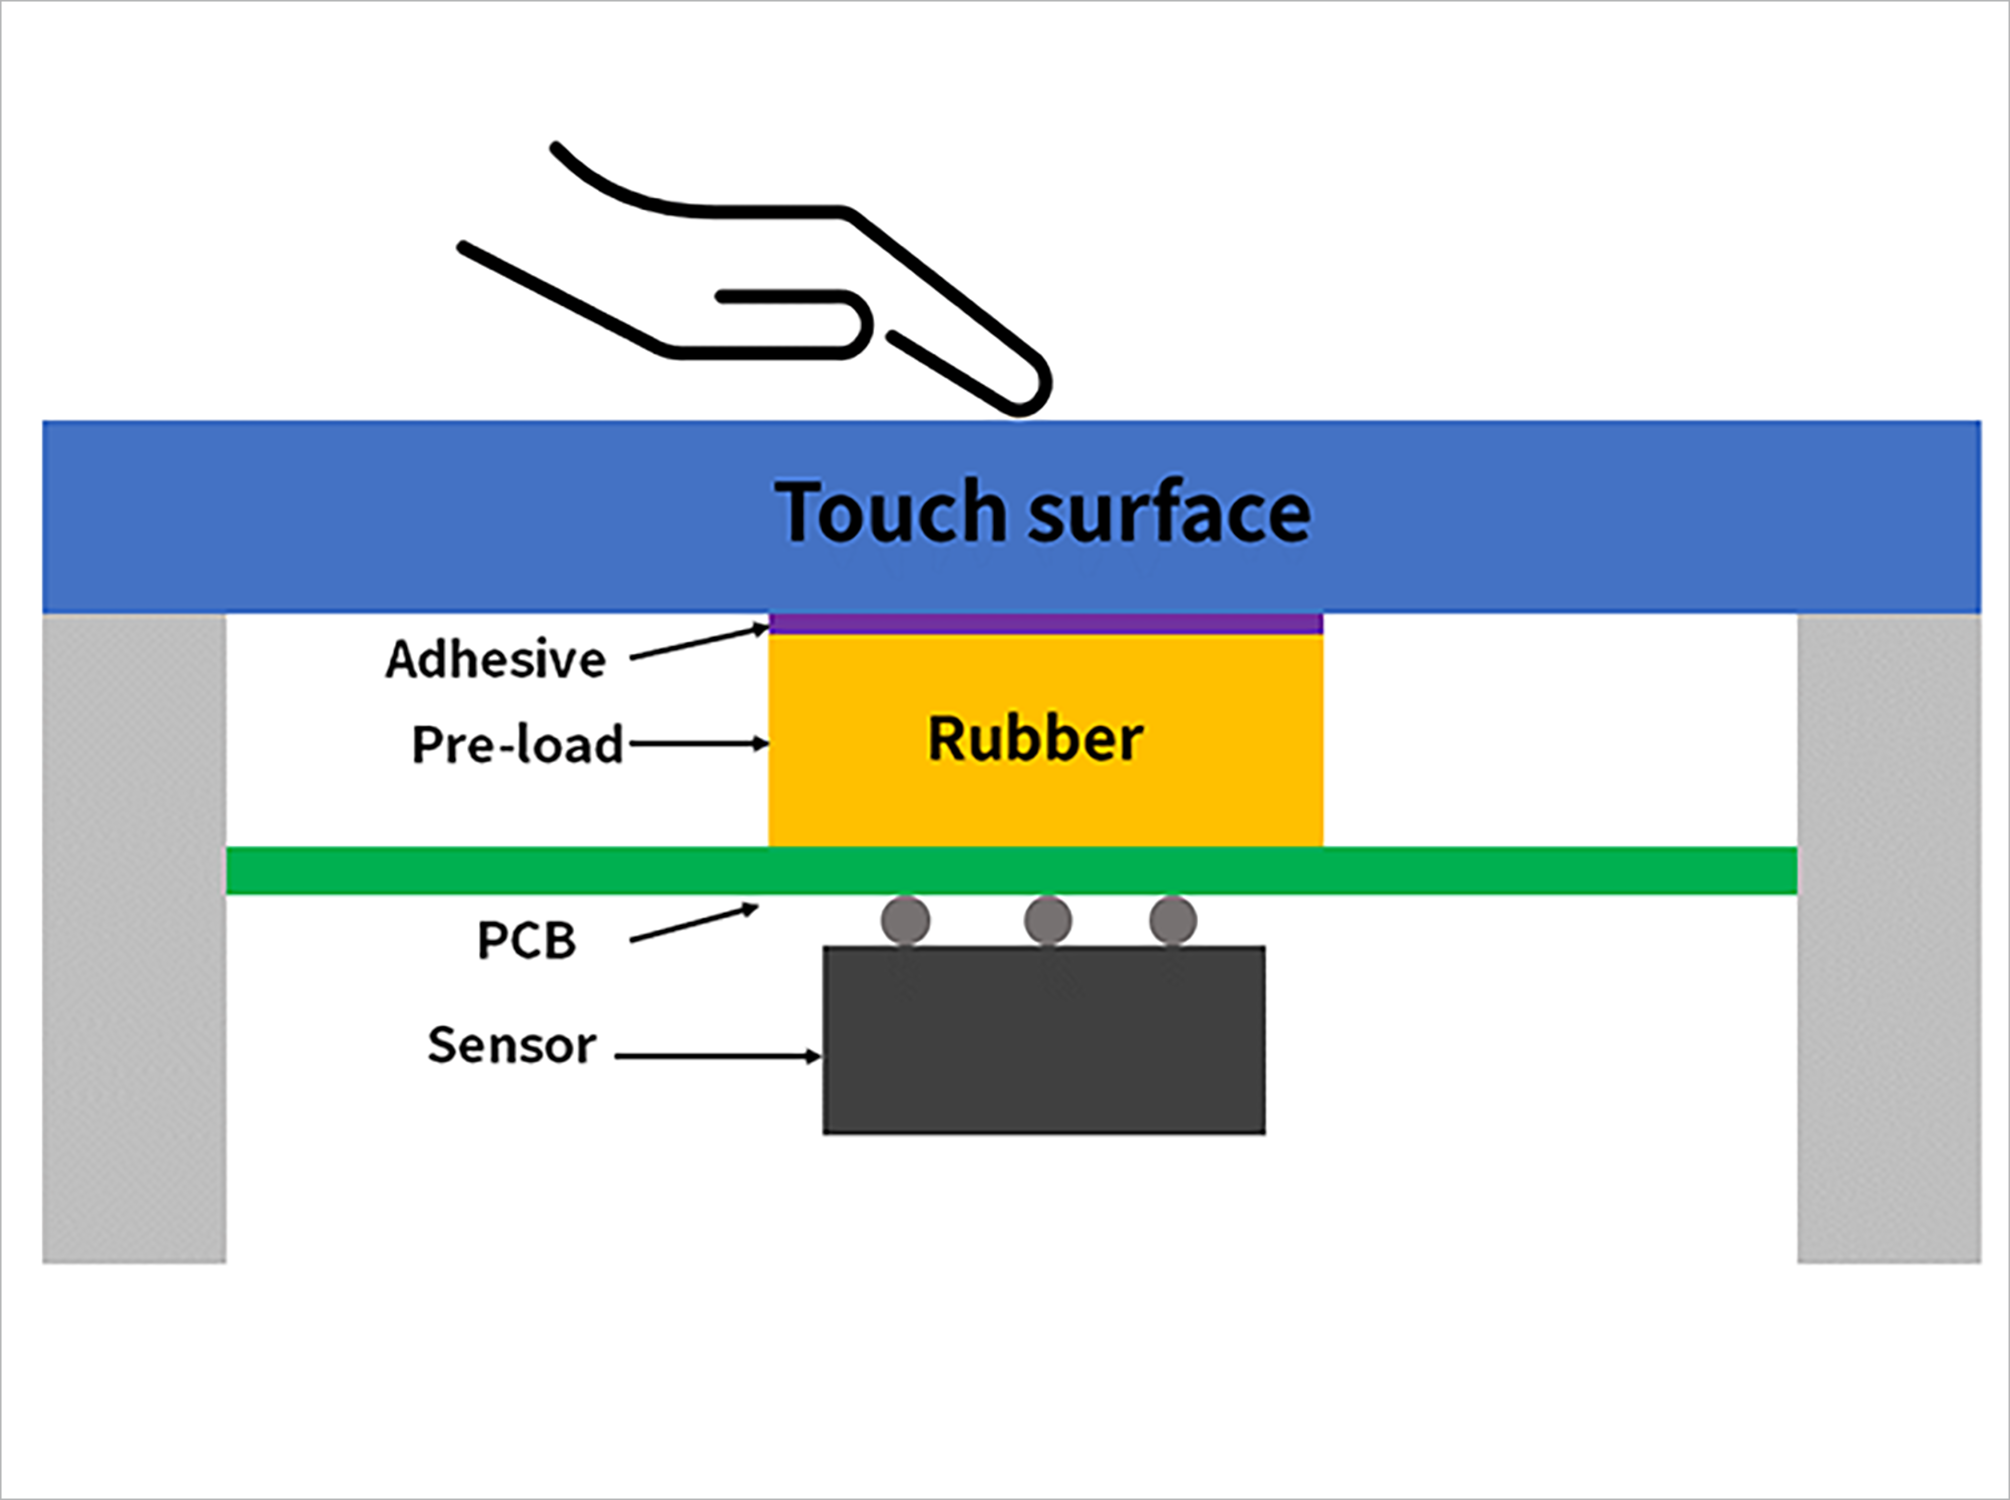 Mounting method 2: Rubber, board, and sensor configuration directly below the touch surface